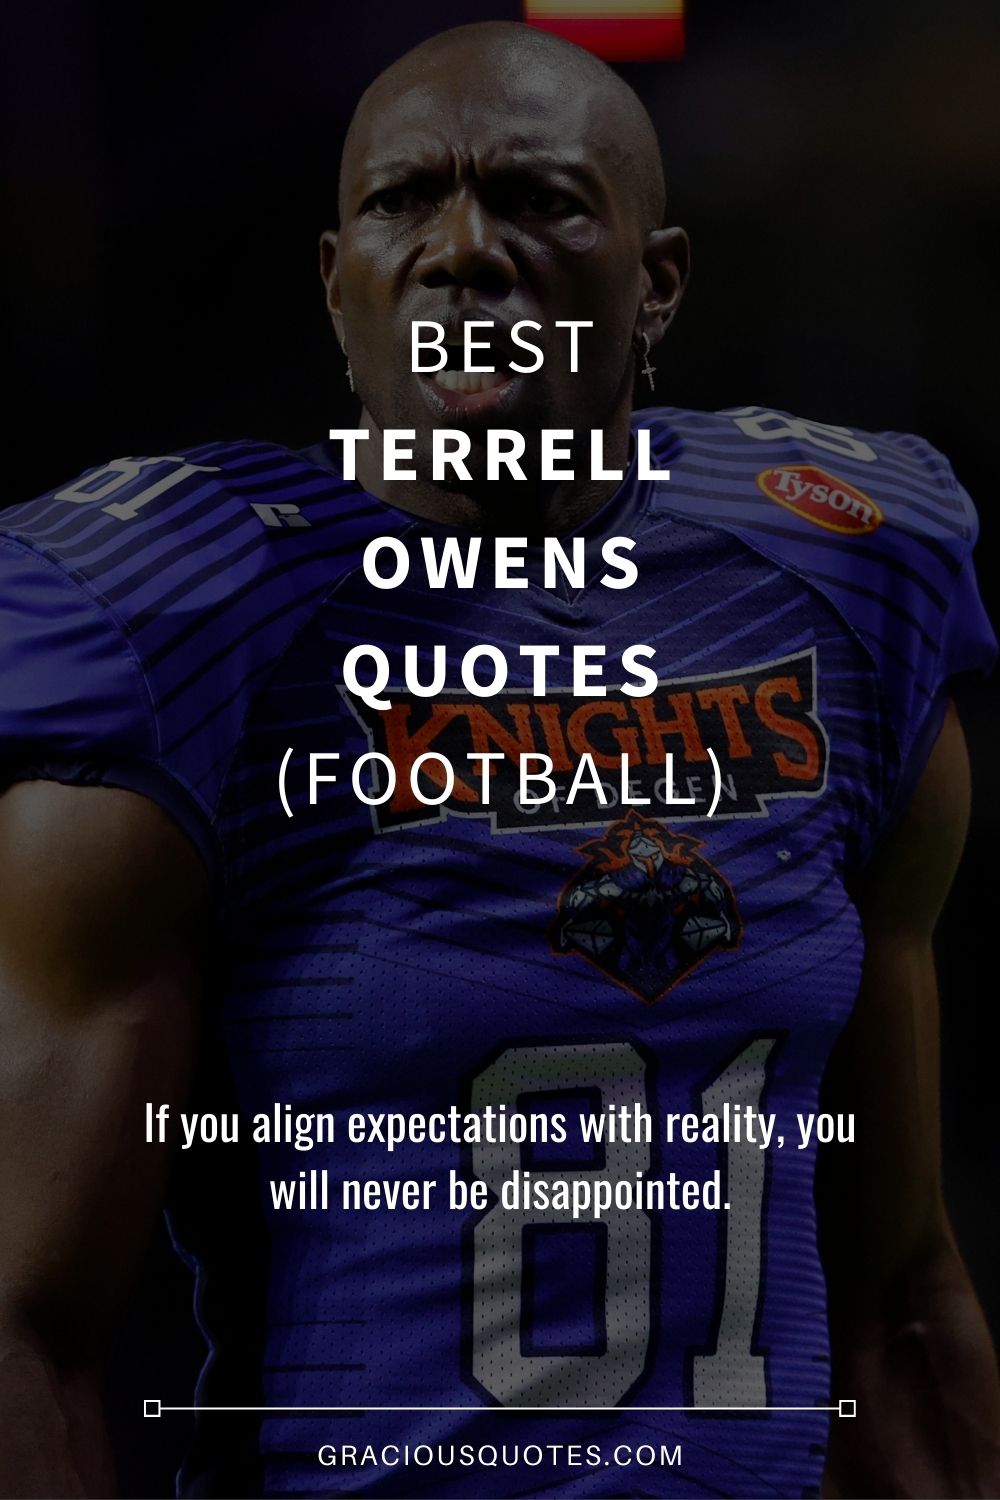 Best Terrell Owens Quotes (FOOTBALL) - Gracious Quotes